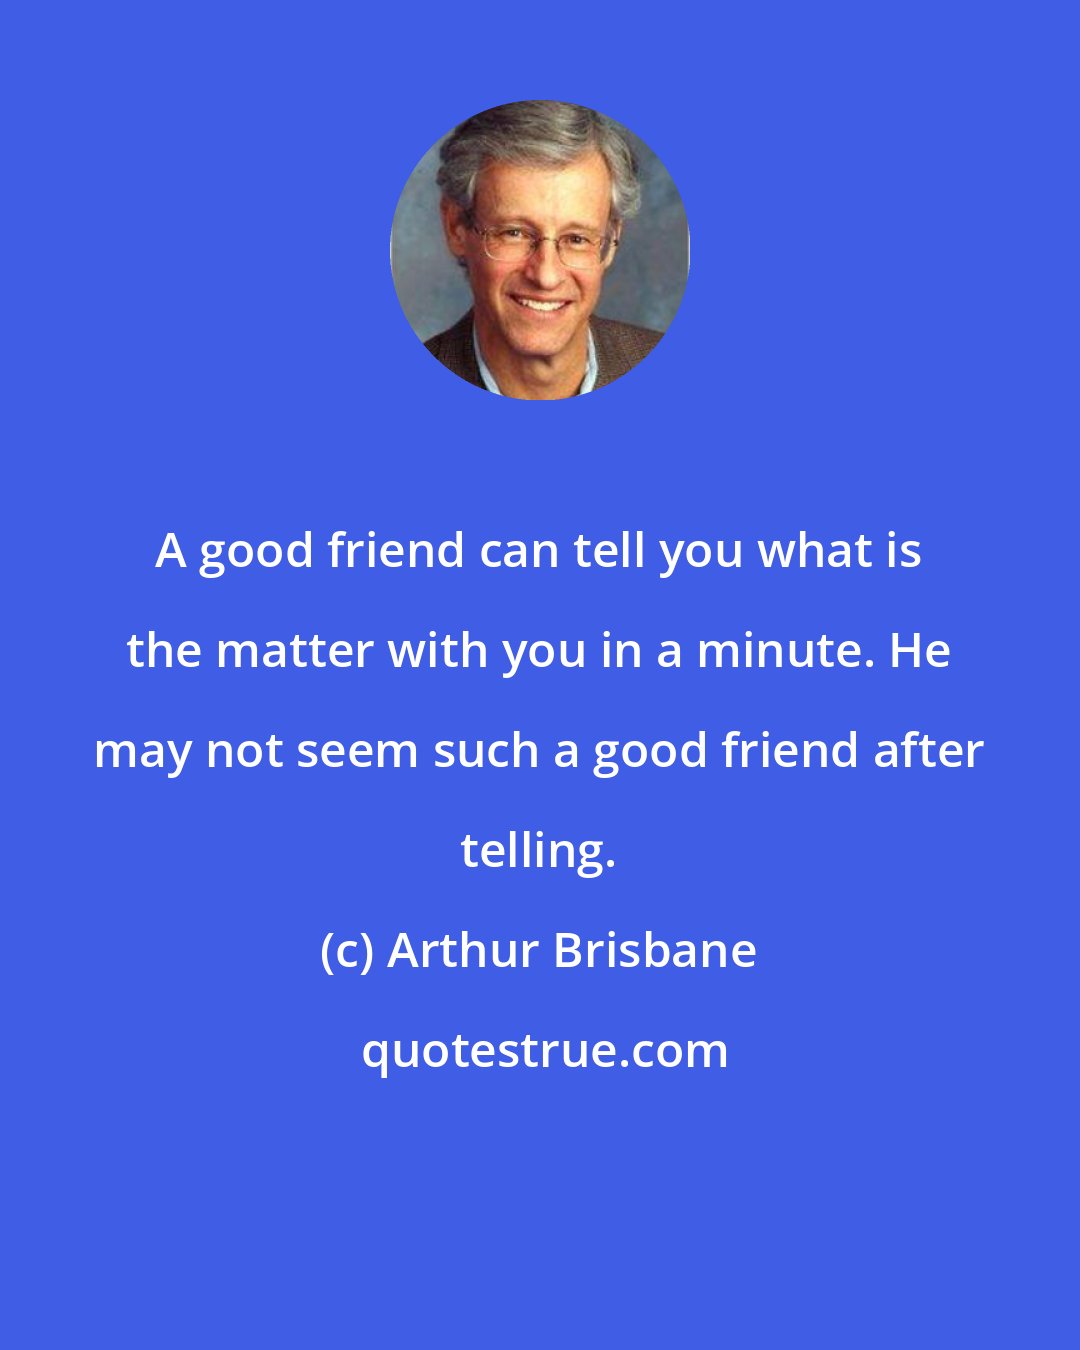 Arthur Brisbane: A good friend can tell you what is the matter with you in a minute. He may not seem such a good friend after telling.